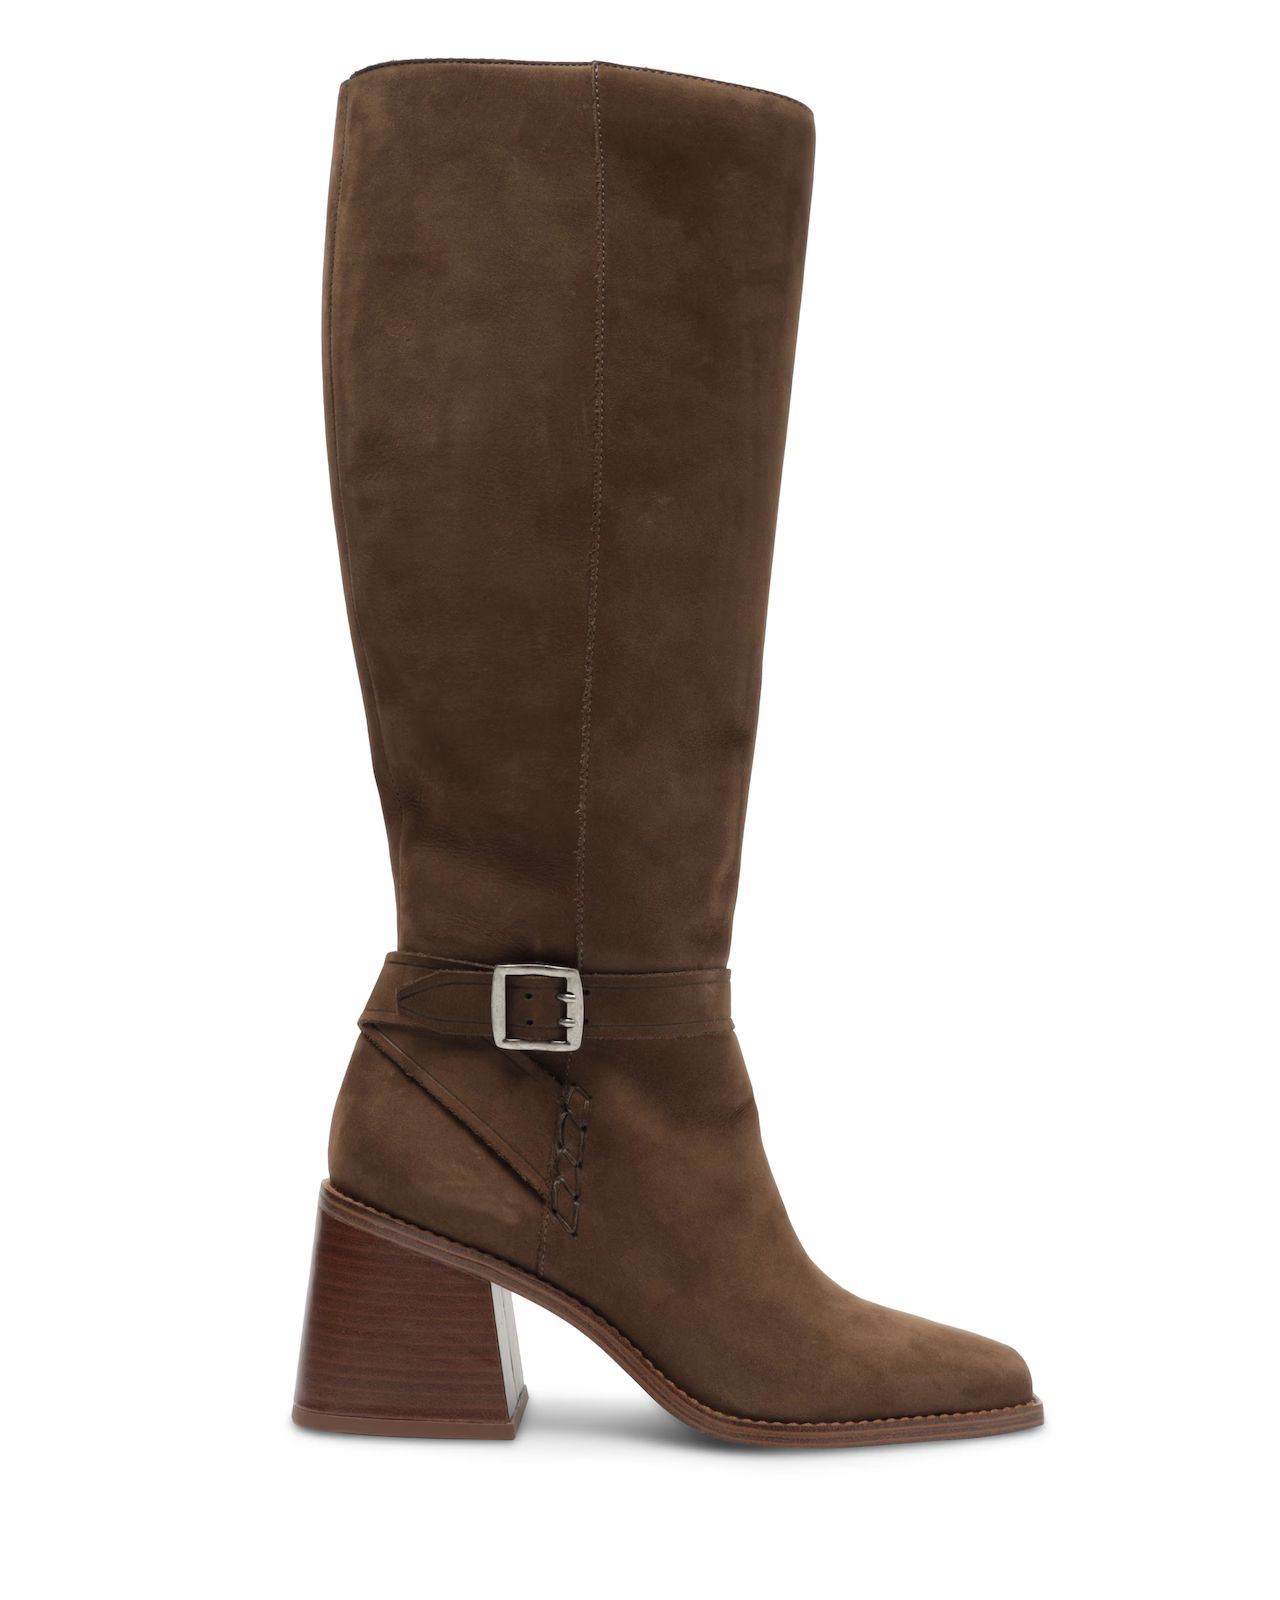 Vince Camuto Seshlyan Extra Wide-Calf Boot | Vince Camuto